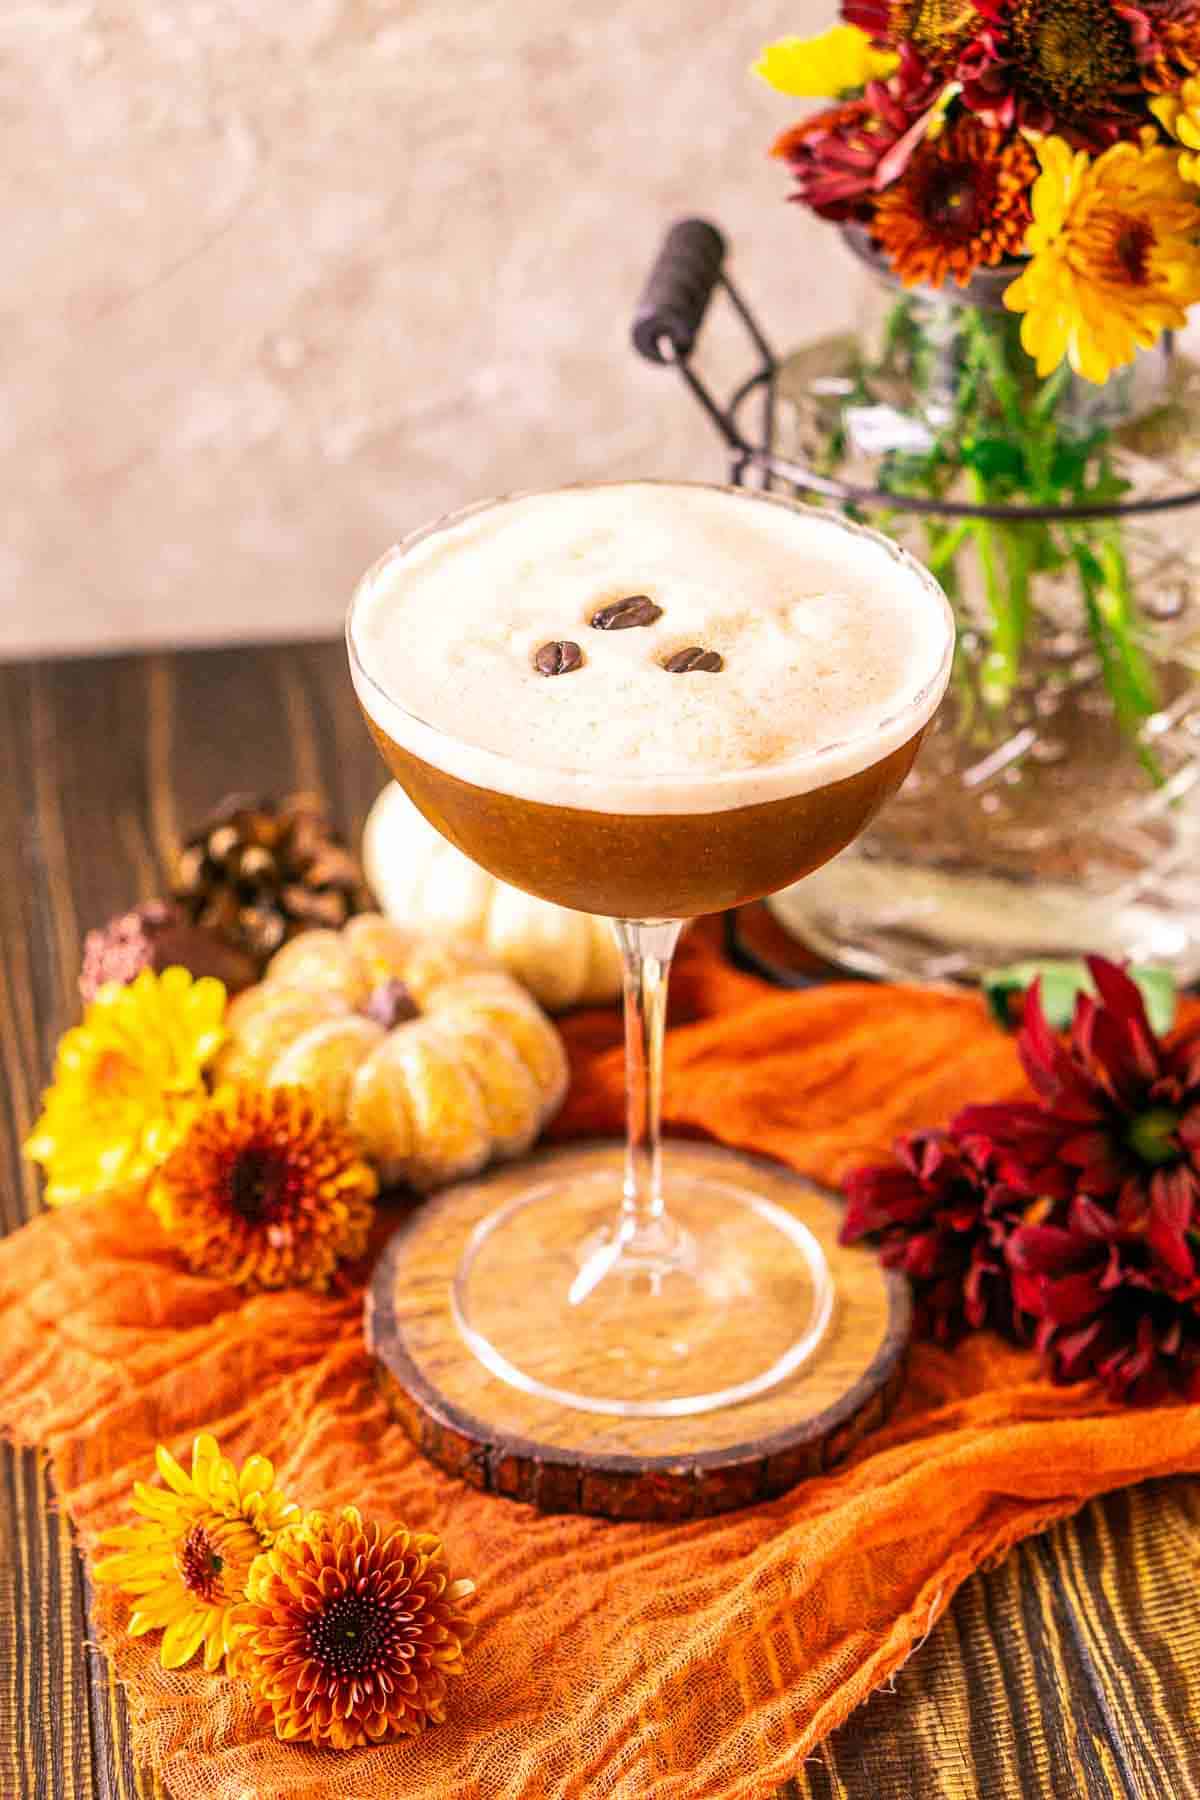 Looking down on a pumpkin spice espresso martini with fall flowers placed around it on orange cloth.